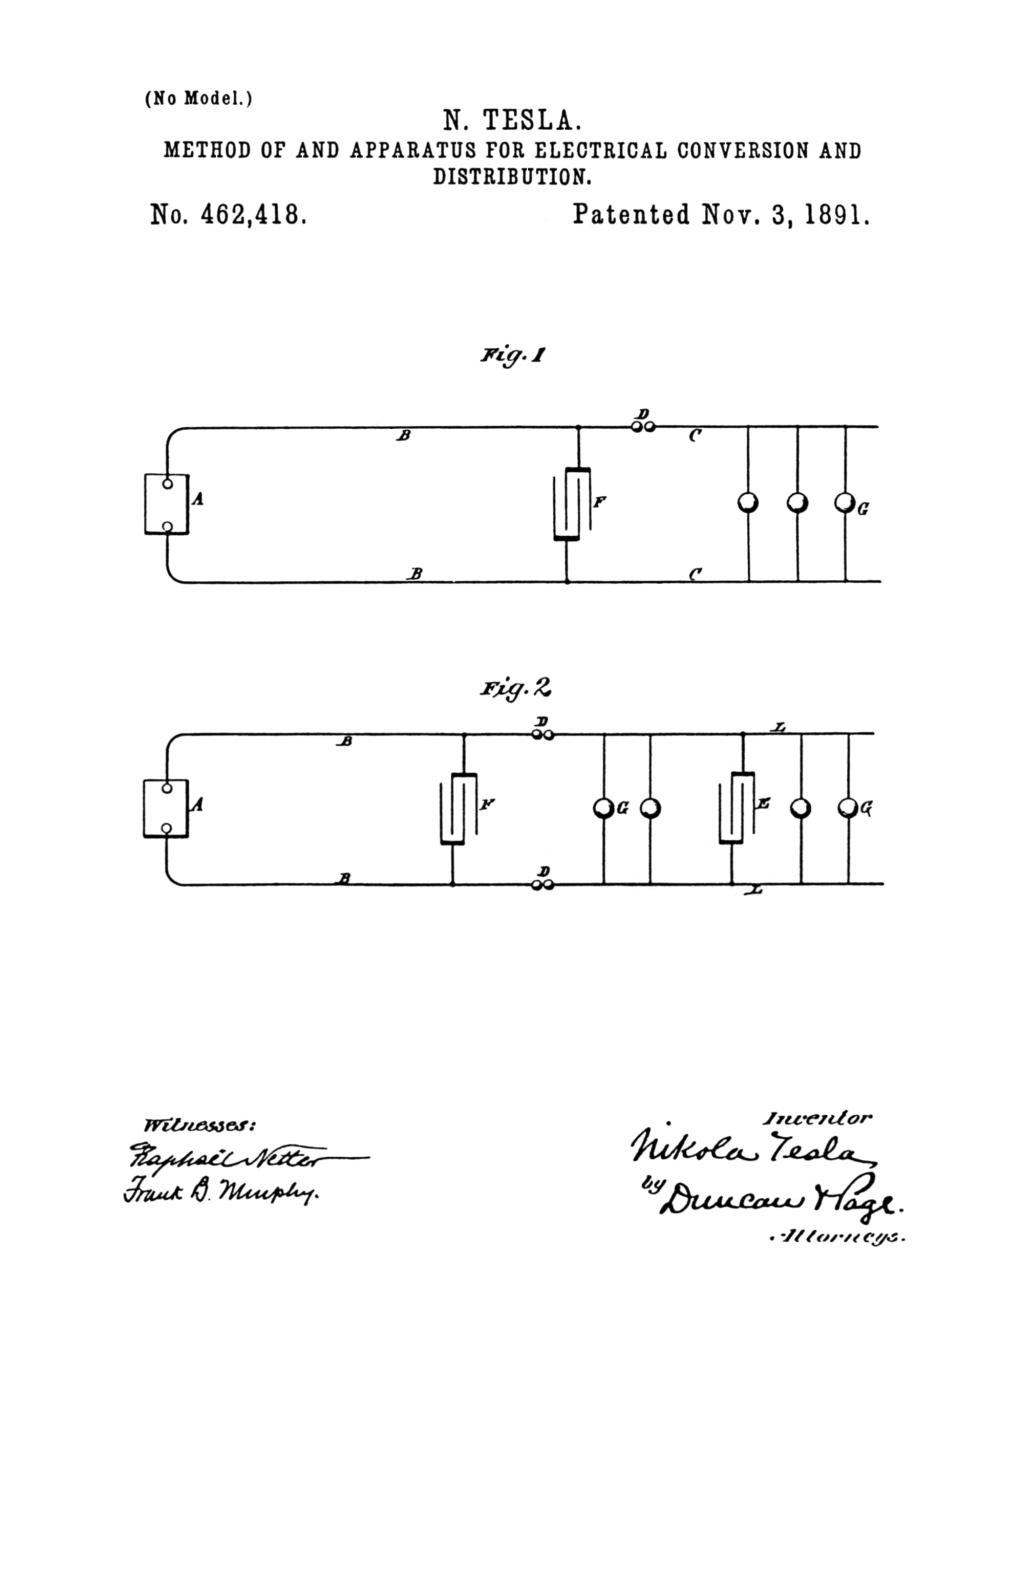 Nikola Tesla U.S. Patent 462,418 - Method of and Apparatus for Electrical Conversion and Distribution - Image 1